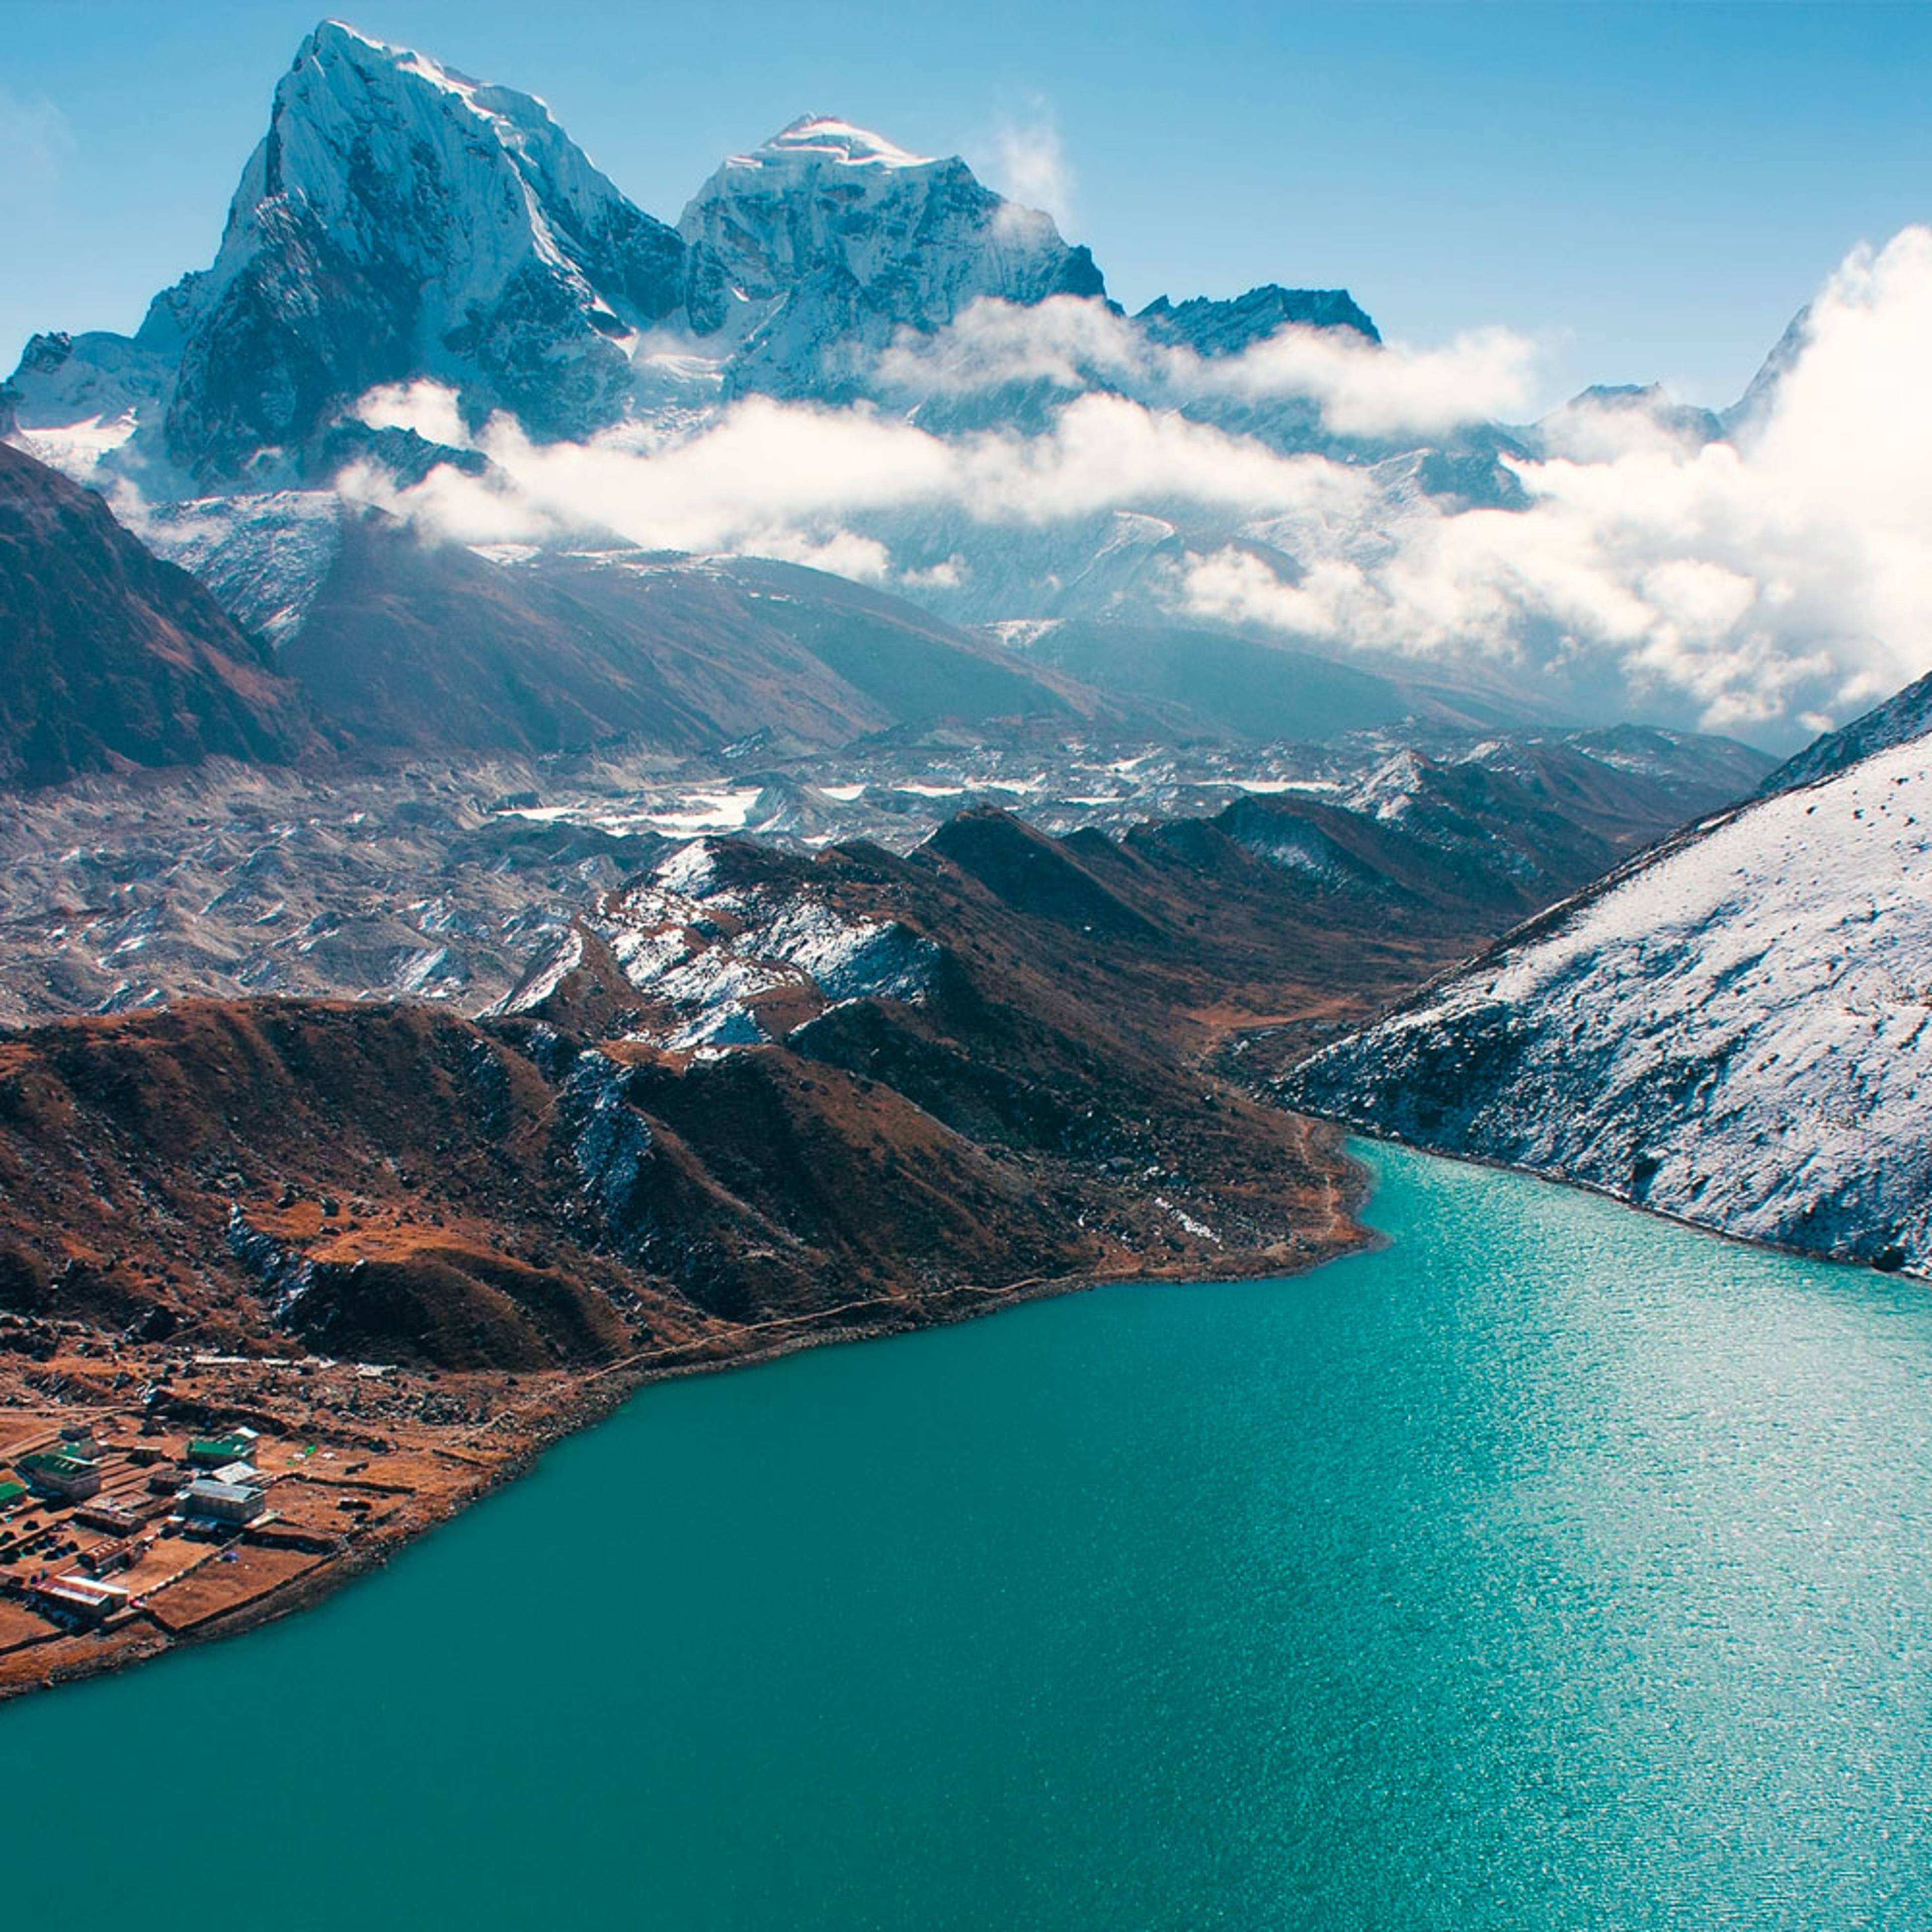 Design your perfect tour of Nepal's lakes with a local expert